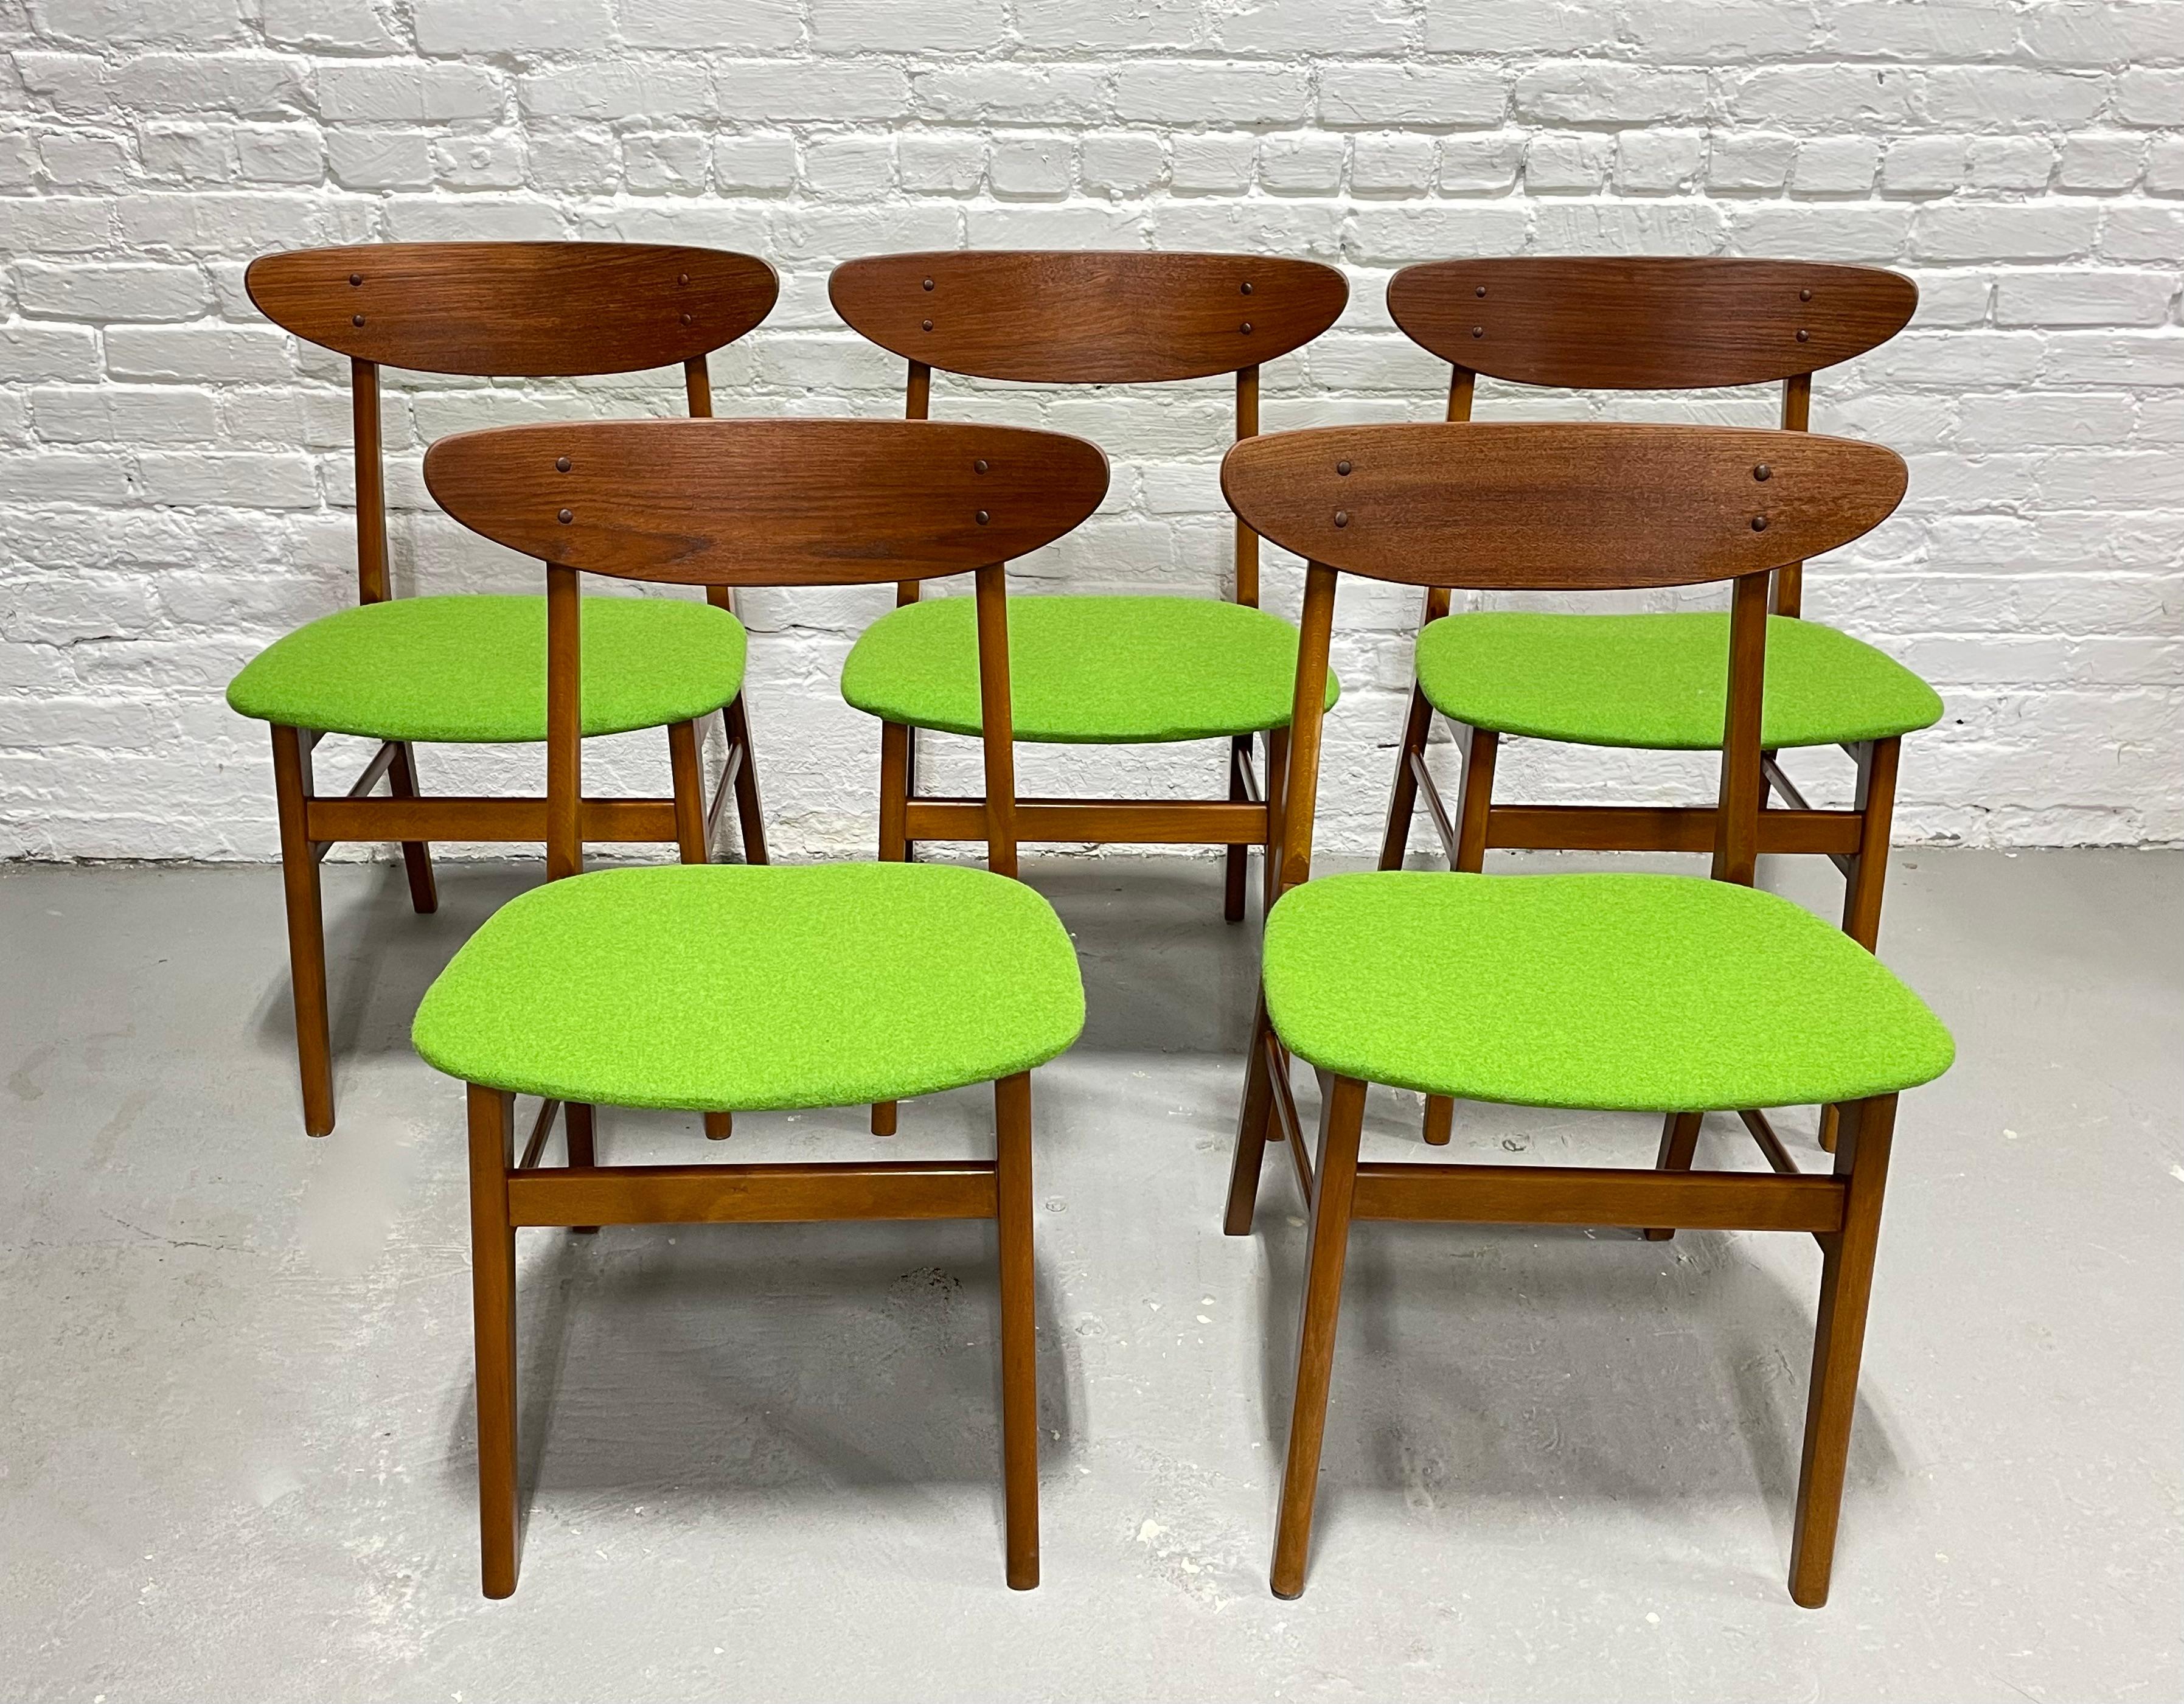 Set of Five Mid Century Modern Teak Danish Dining Chairs by Farstrup Mobler, Made in Denmark, c. 1960's.  These chairs are showstoppers from every angle, from the curved backrest to the pristine apple green wool upholstery. The stunning teak wood